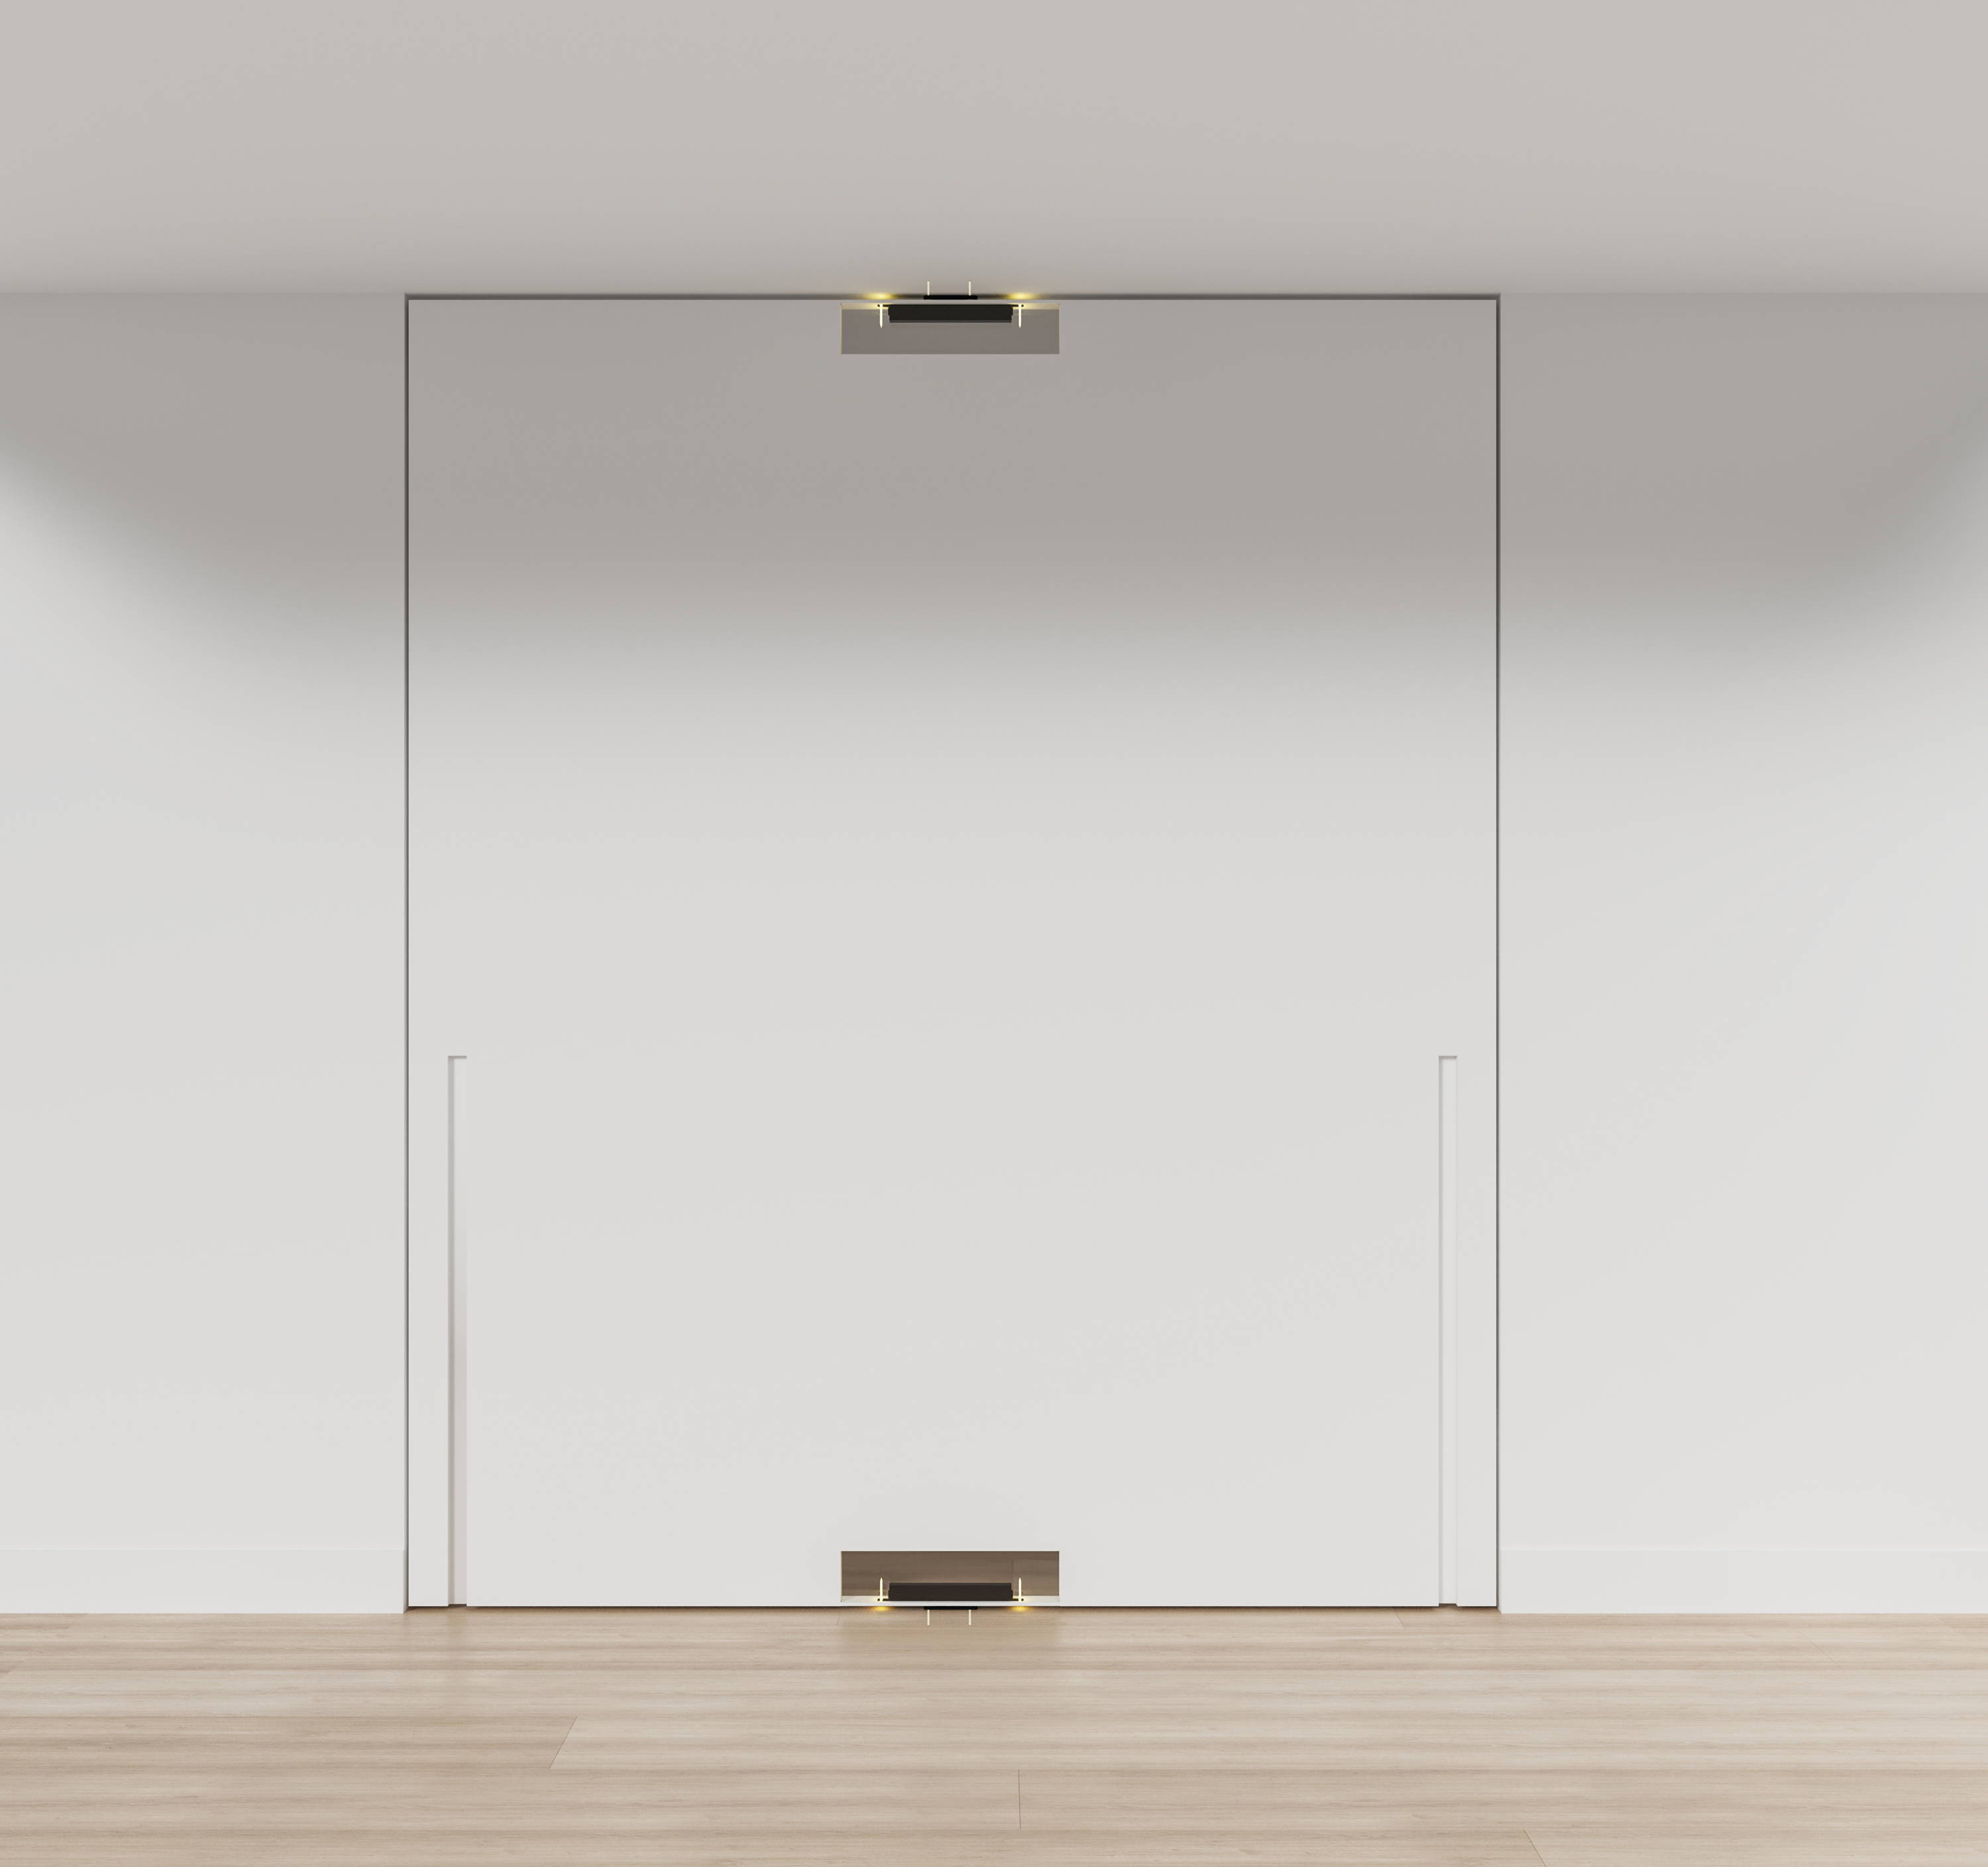 Pivot door with central axis